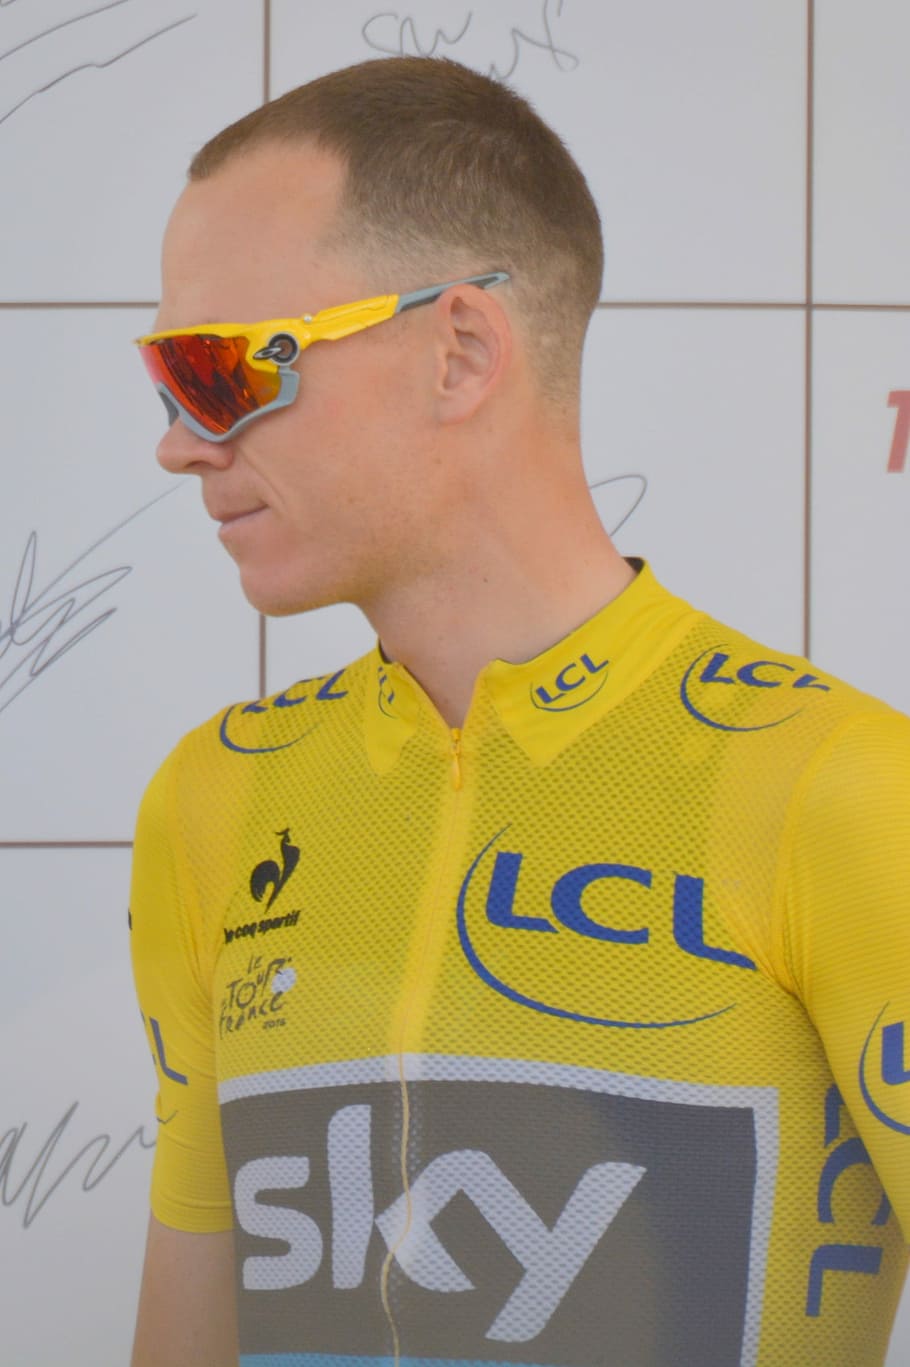 Chris Froome, Champion, Yellow Jersey, celebrity, cyclist, professional road bicycle racer, man, people, winner, one person